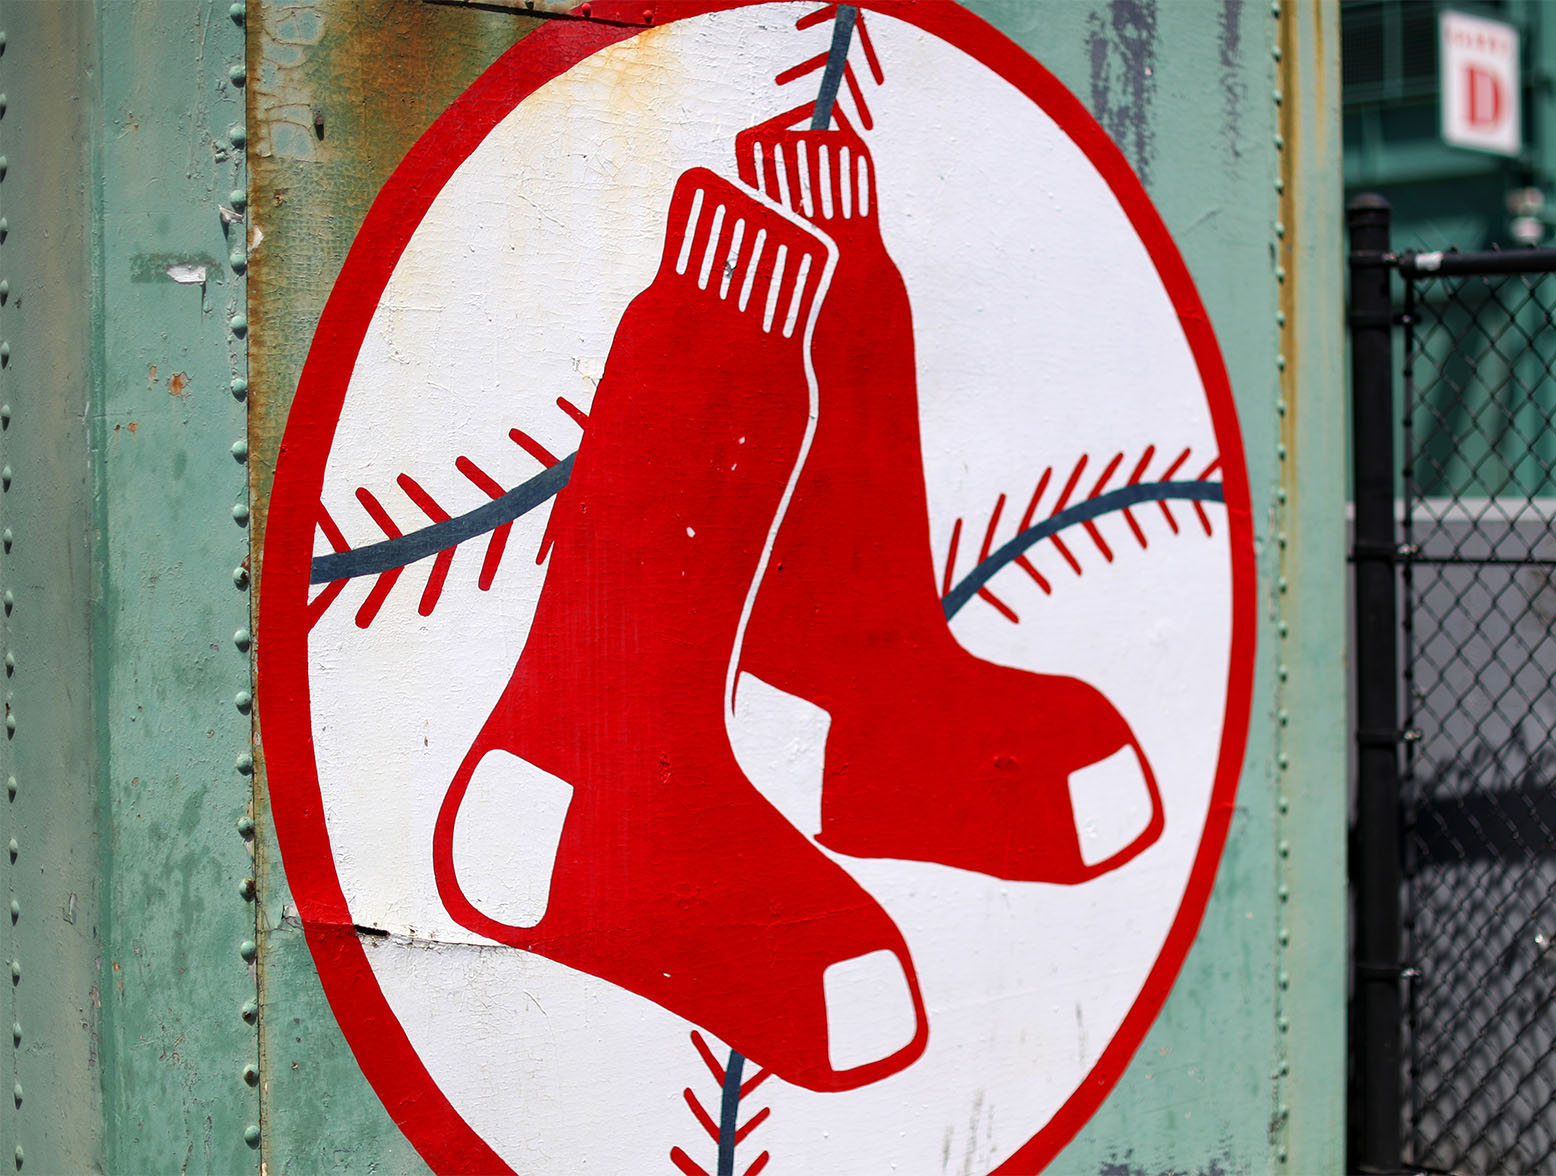 BOSTON, MASSACHUSETTS - MAY 20: A view of the Red Sox logo outside of Fenway Park on May 20, 2020 in Boston, Massachusetts. (Photo by Maddie Meyer/Getty Images)